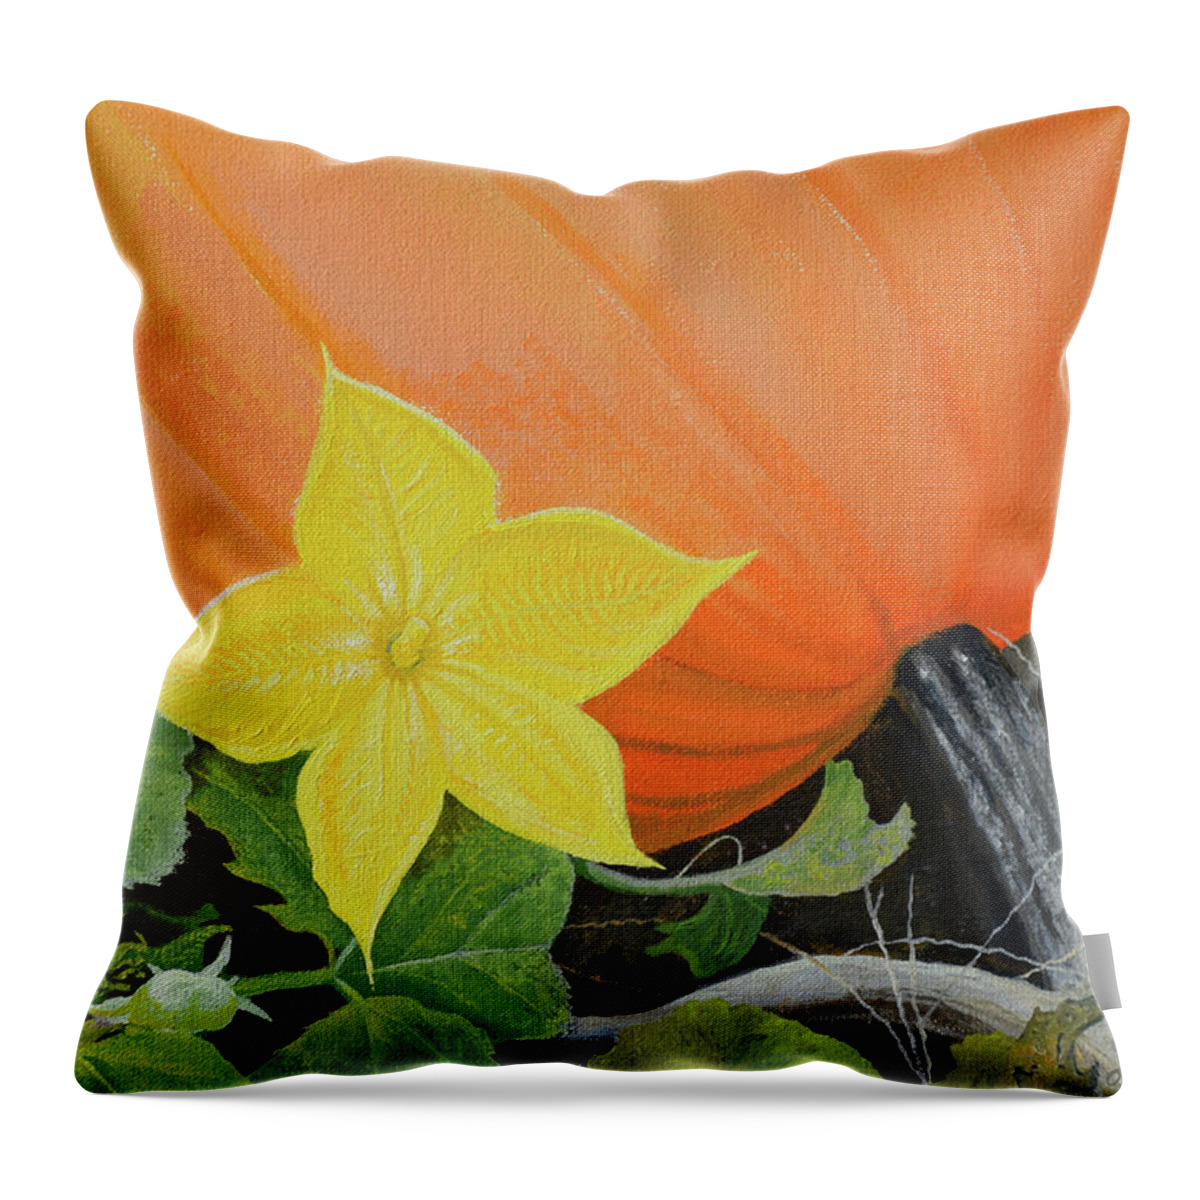 Pumpkin Throw Pillow featuring the painting Pumpkin Blossom by Charles Owens